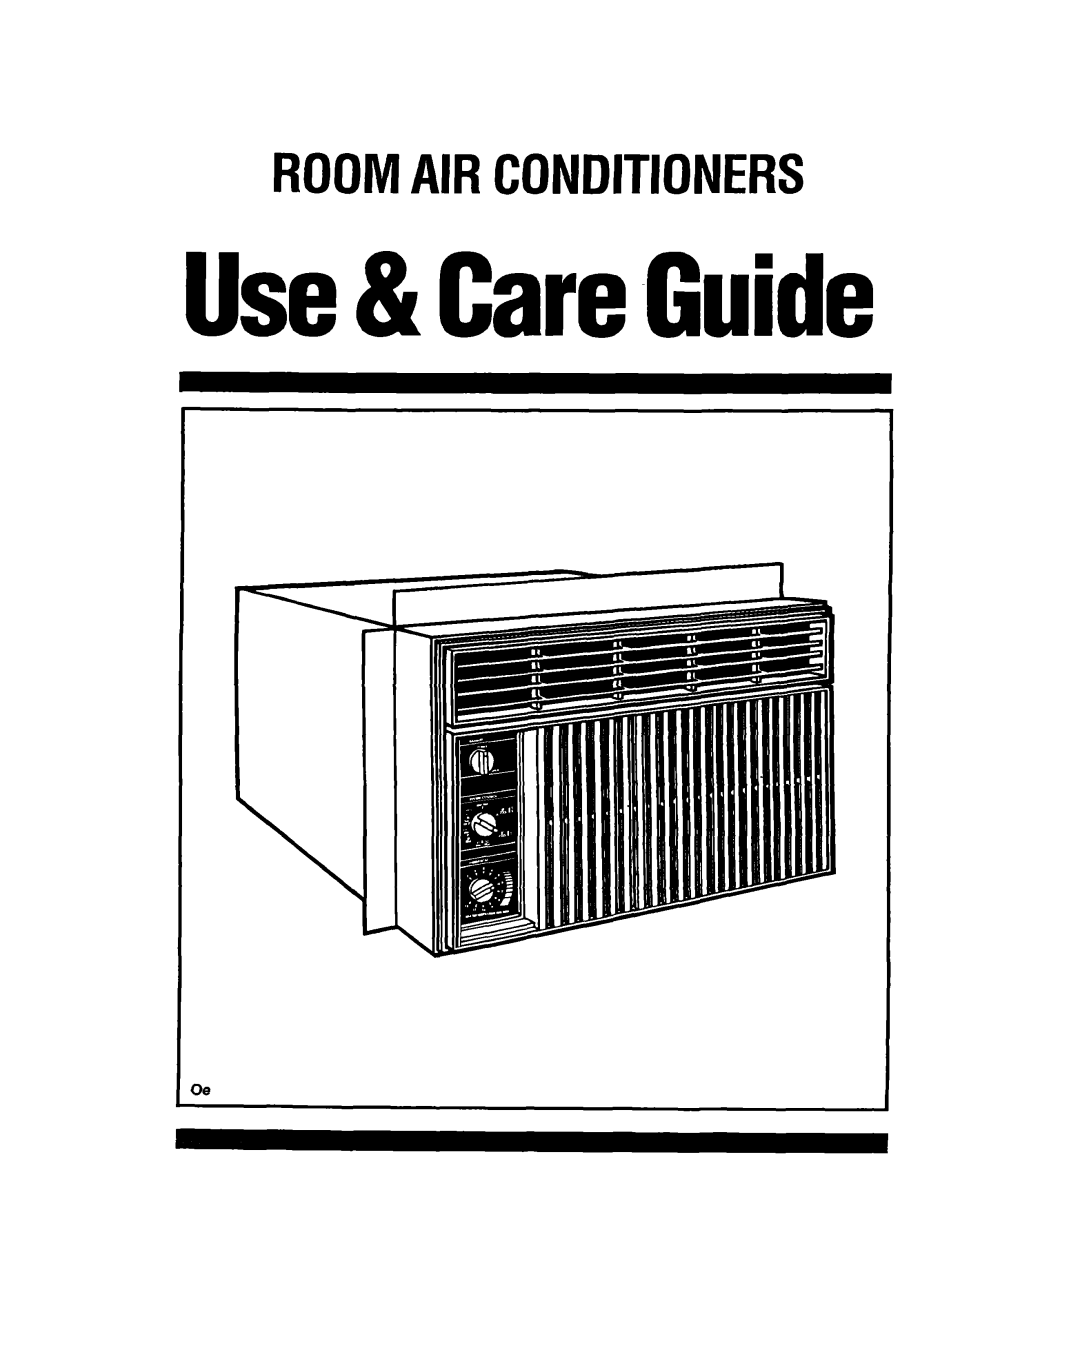 Whirlpool CAH12W04 manual Roomairconditioners, Use& CareGuide 